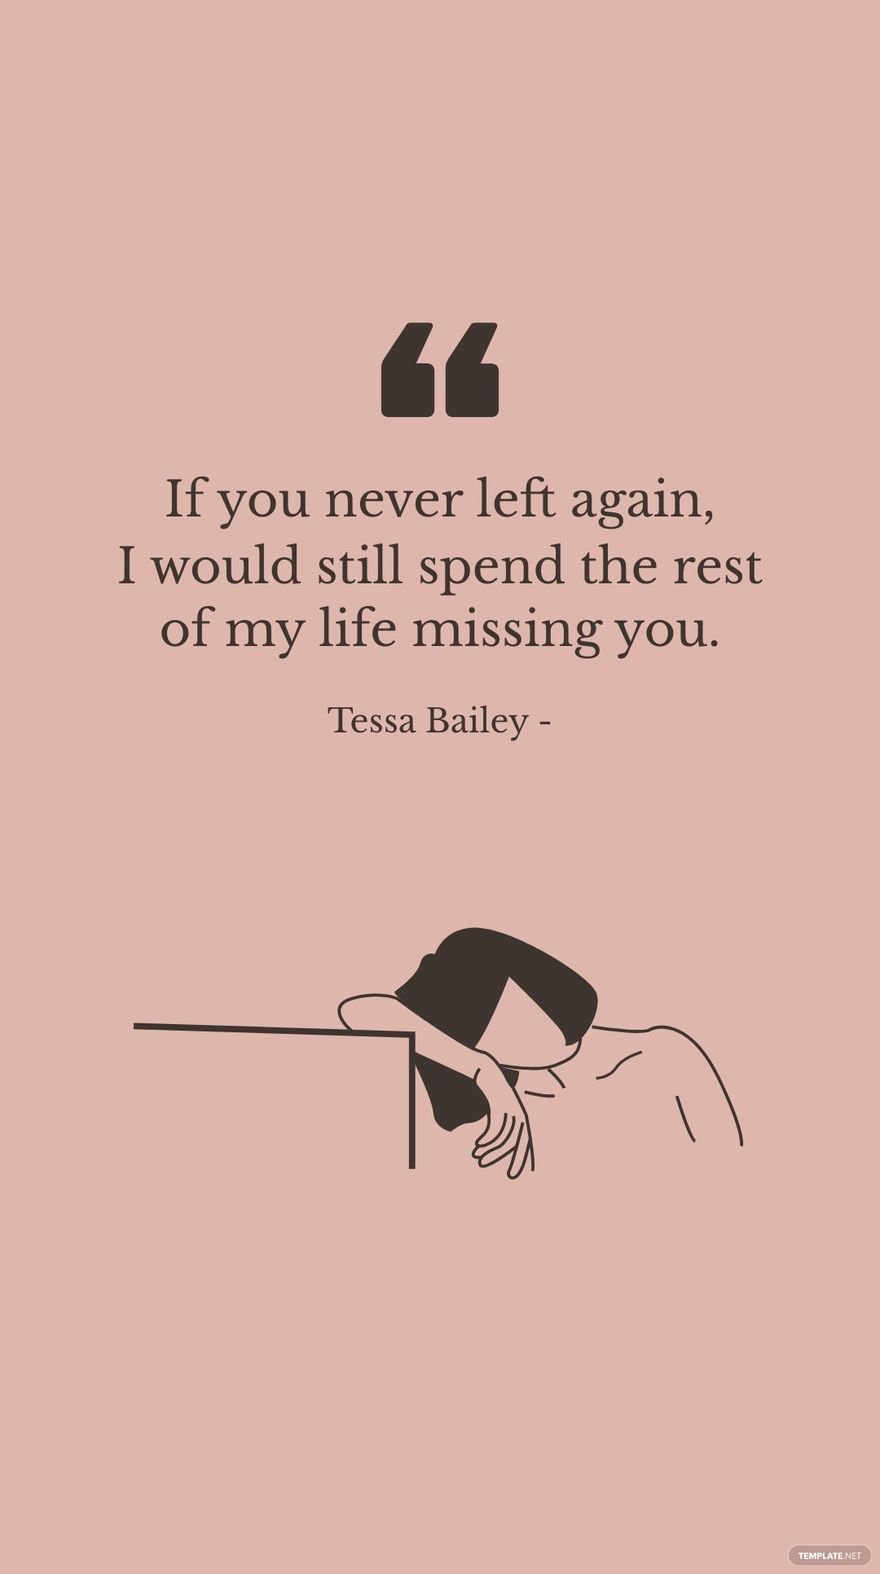 Free Tessa Bailey - If you never left again, I would still spend the rest of my life missing you. in JPG